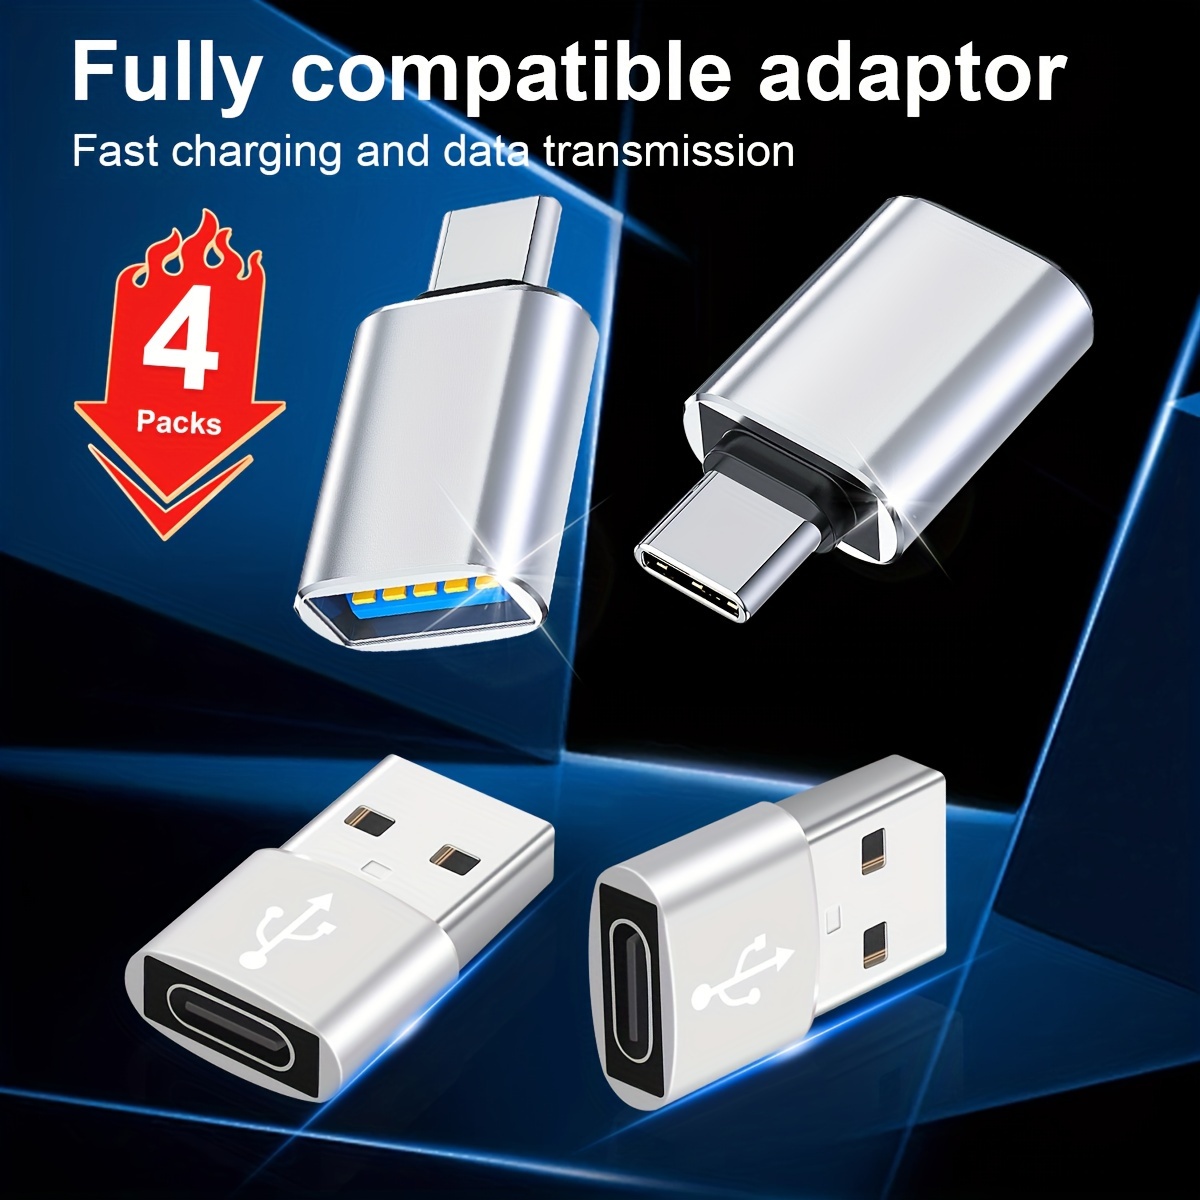 Usb Computer Mobile Charger  Usb Phone Splitter Charger - Usb 2.0